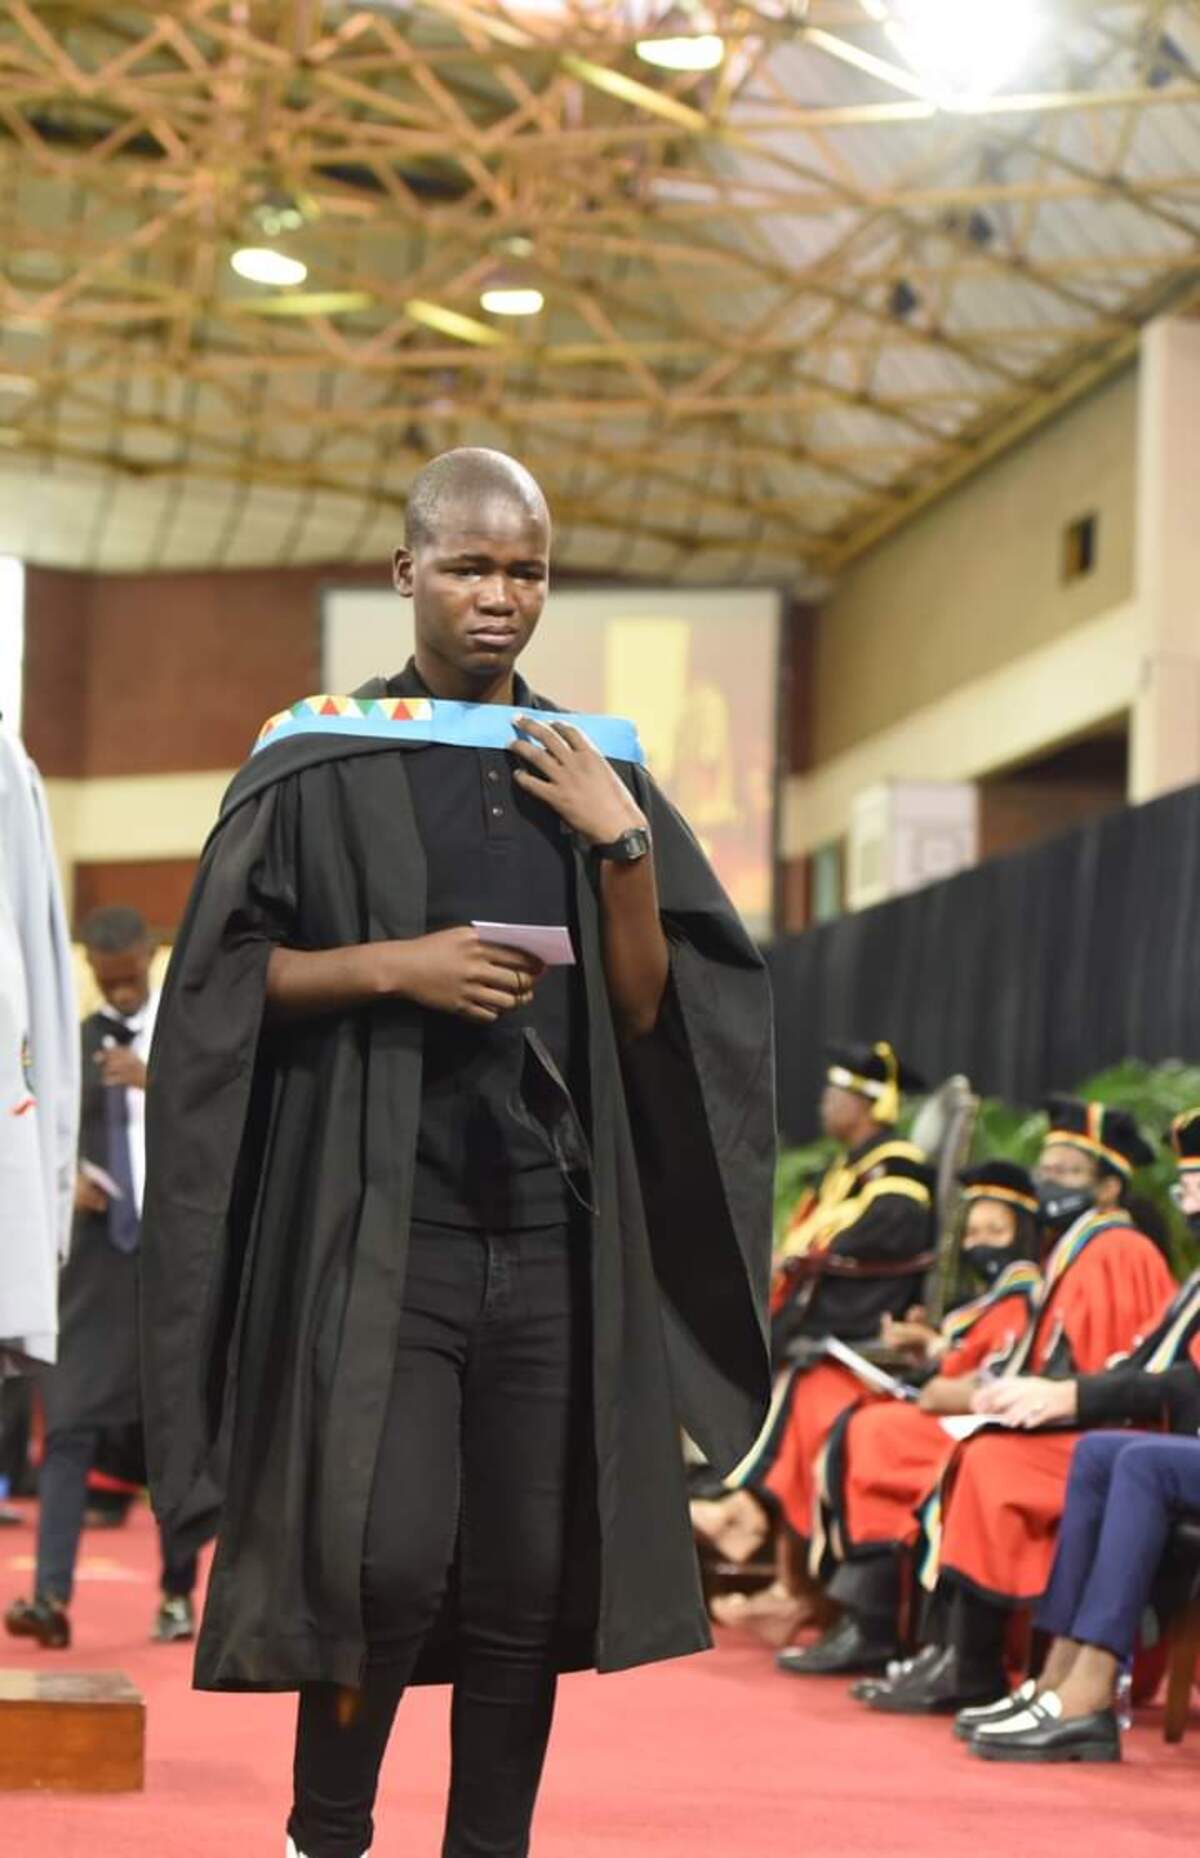 PICS: When Grace Locates You - Crying UKZN Student Who Could Not Afford Graduation Suit Celebrates 